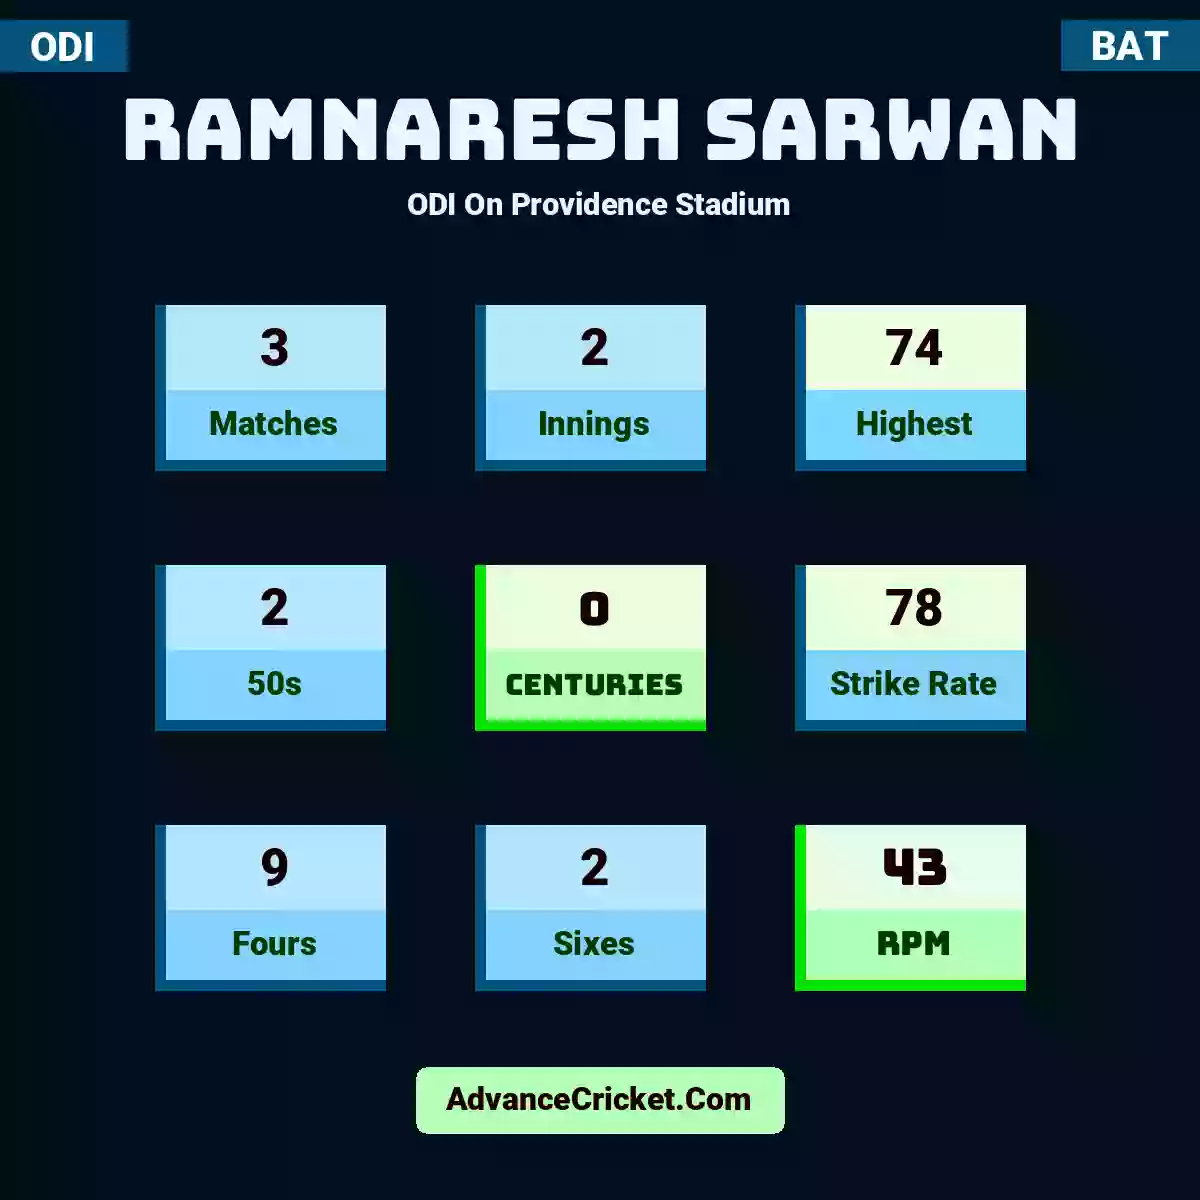 Ramnaresh Sarwan ODI  On Providence Stadium, Ramnaresh Sarwan played 3 matches, scored 74 runs as highest, 2 half-centuries, and 0 centuries, with a strike rate of 78. R.Sarwan hit 9 fours and 2 sixes, with an RPM of 43.